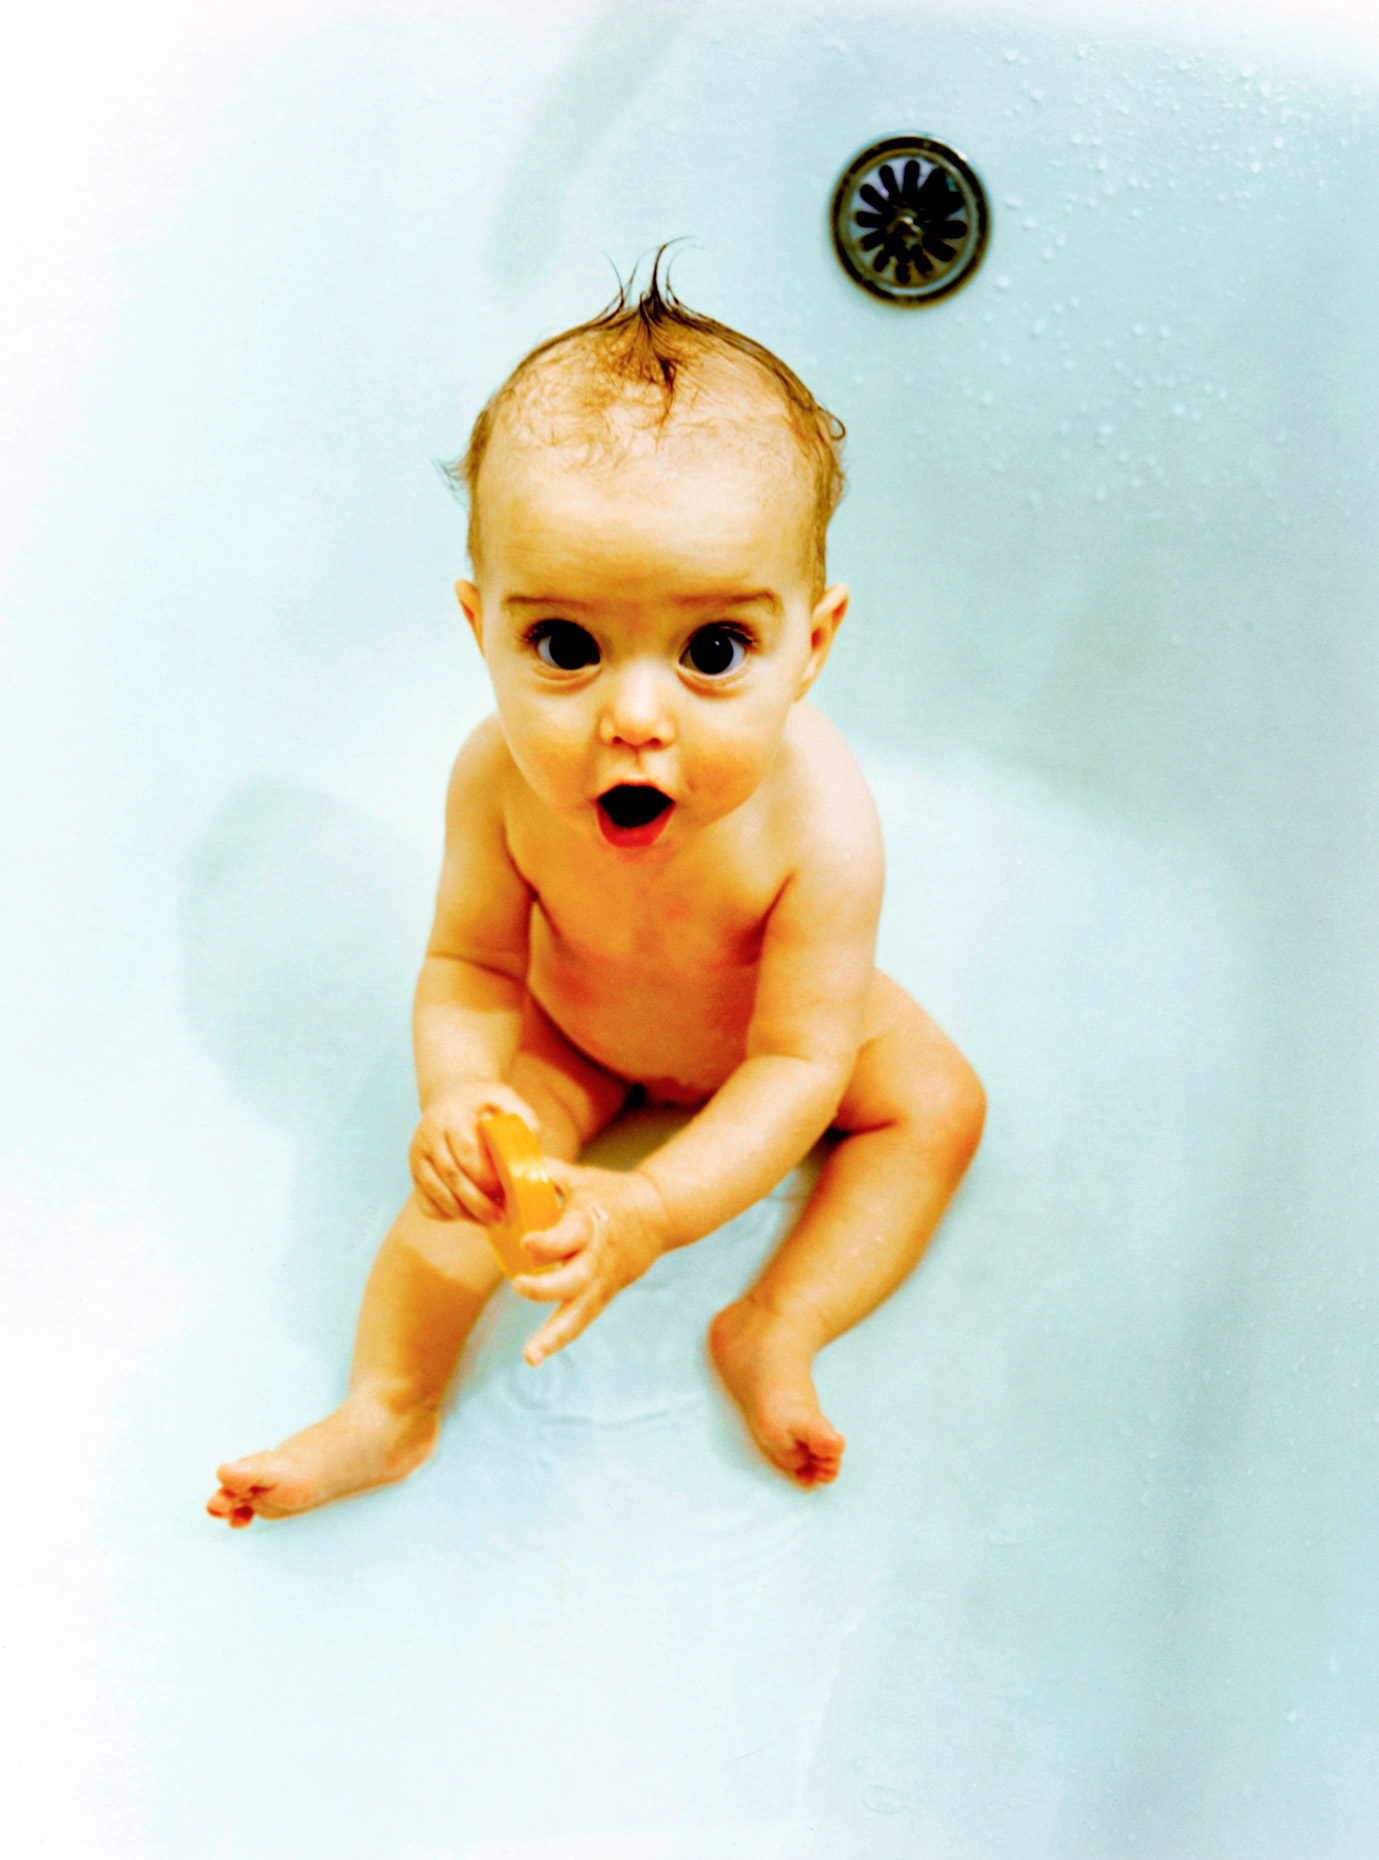 Baby girl (6-12 months old) plays in bathtub.